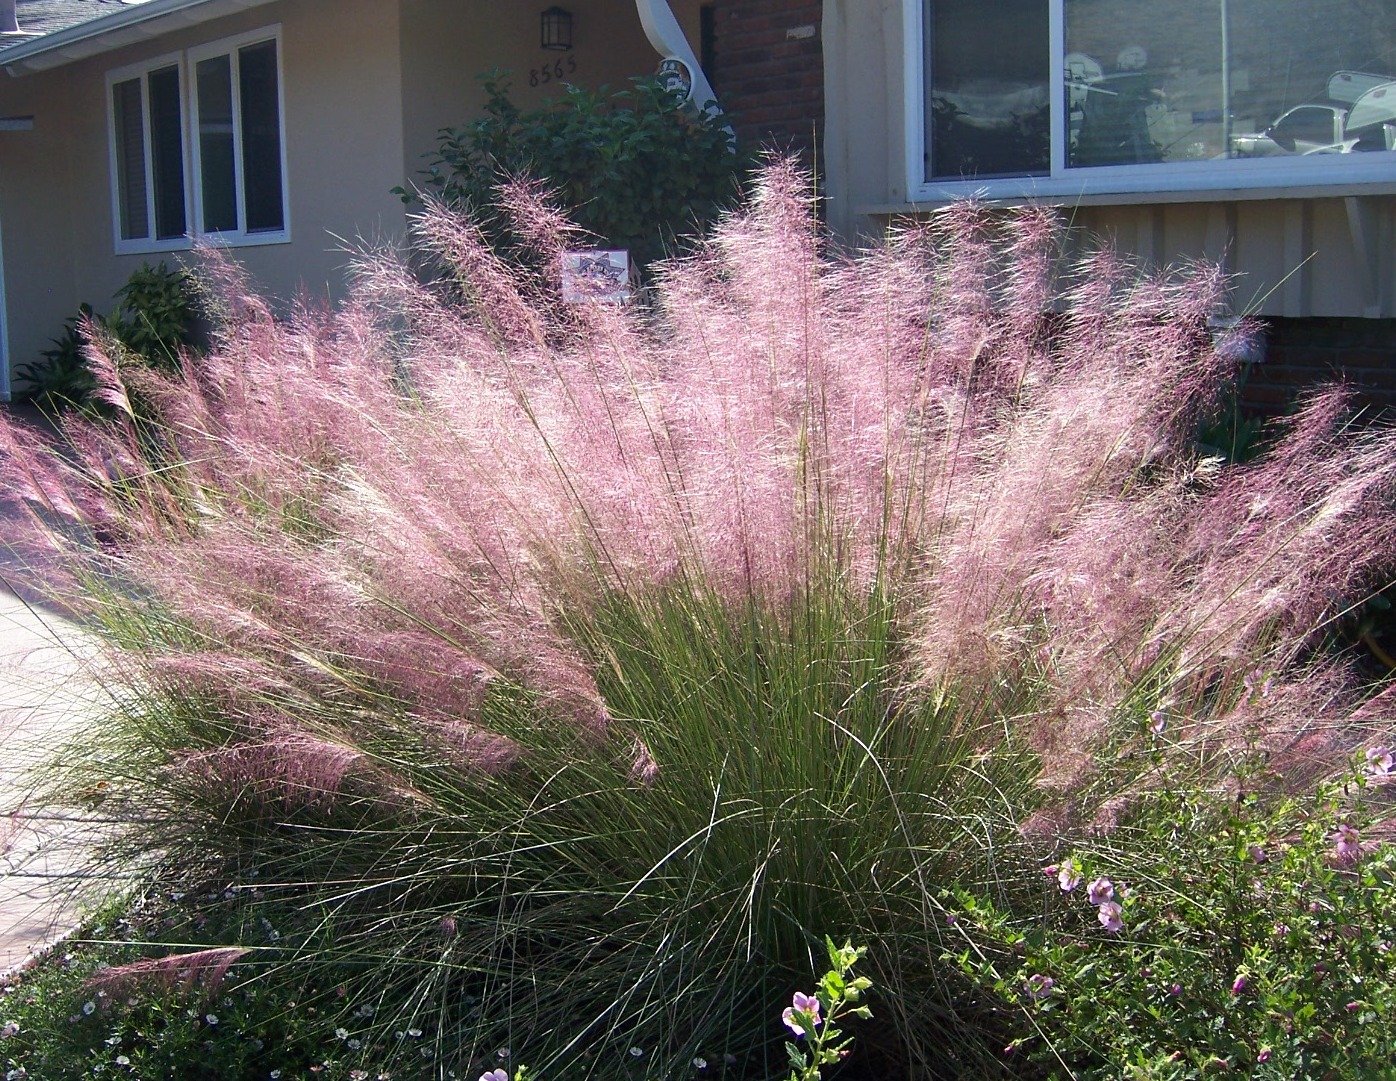 grass muhly pink ornamental grasses muhlenbergia capillaris cotton candy plants garden plumes container try landscaping fall low plant tolerant drought